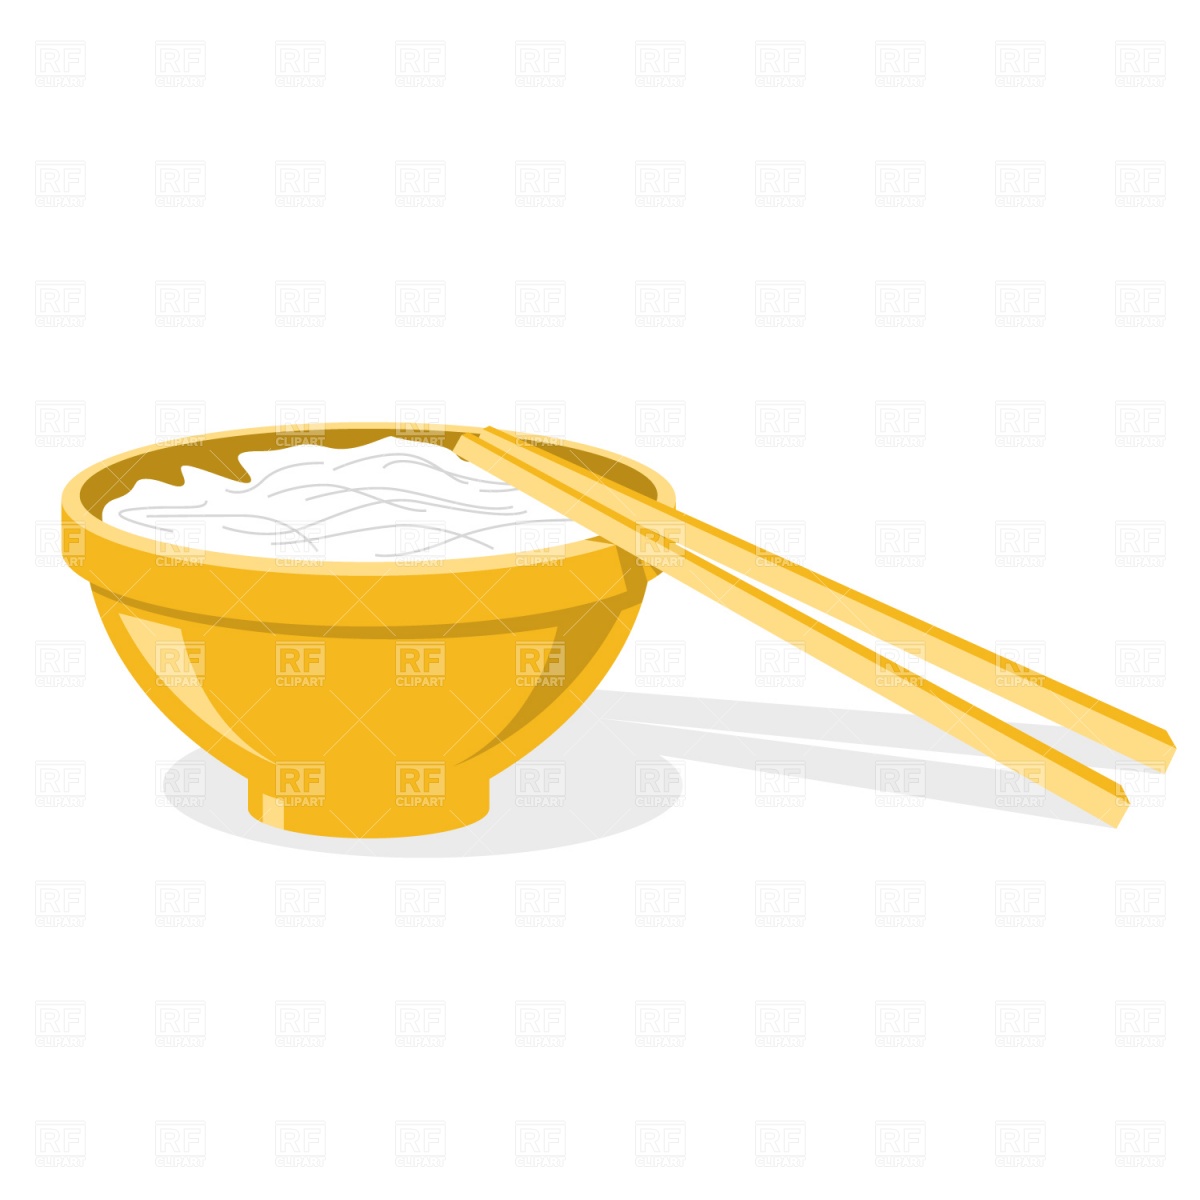 Plate With Rice Noodles Download Royalty Free Vector Clipart  Eps